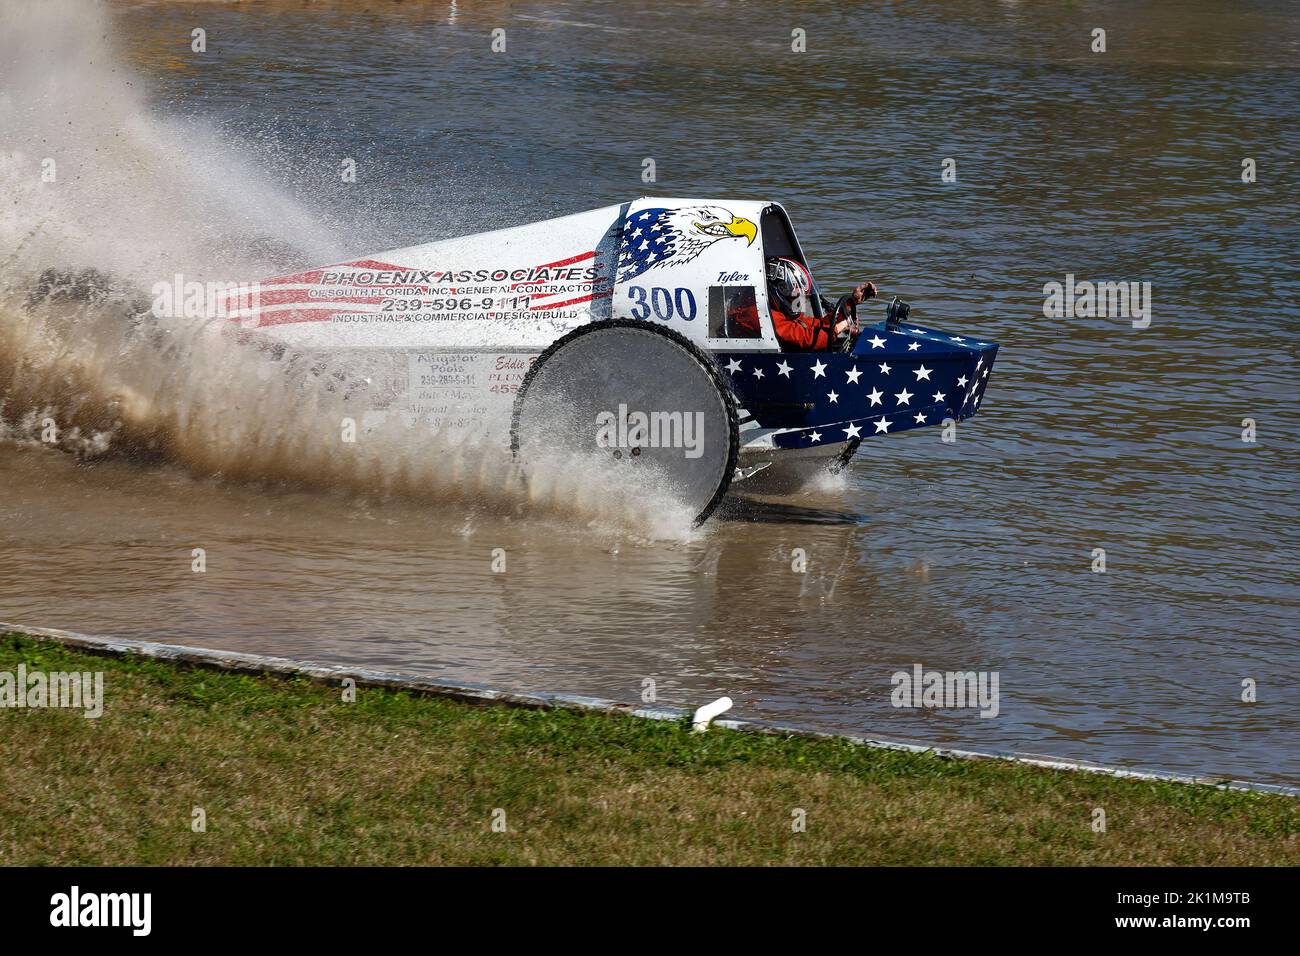 swamp buggy moving through water, action, close-up, water splashing, motion, jeep style, vehicle sport, patriotic, red, white, blue, Florida Sports Pa Stock Photo